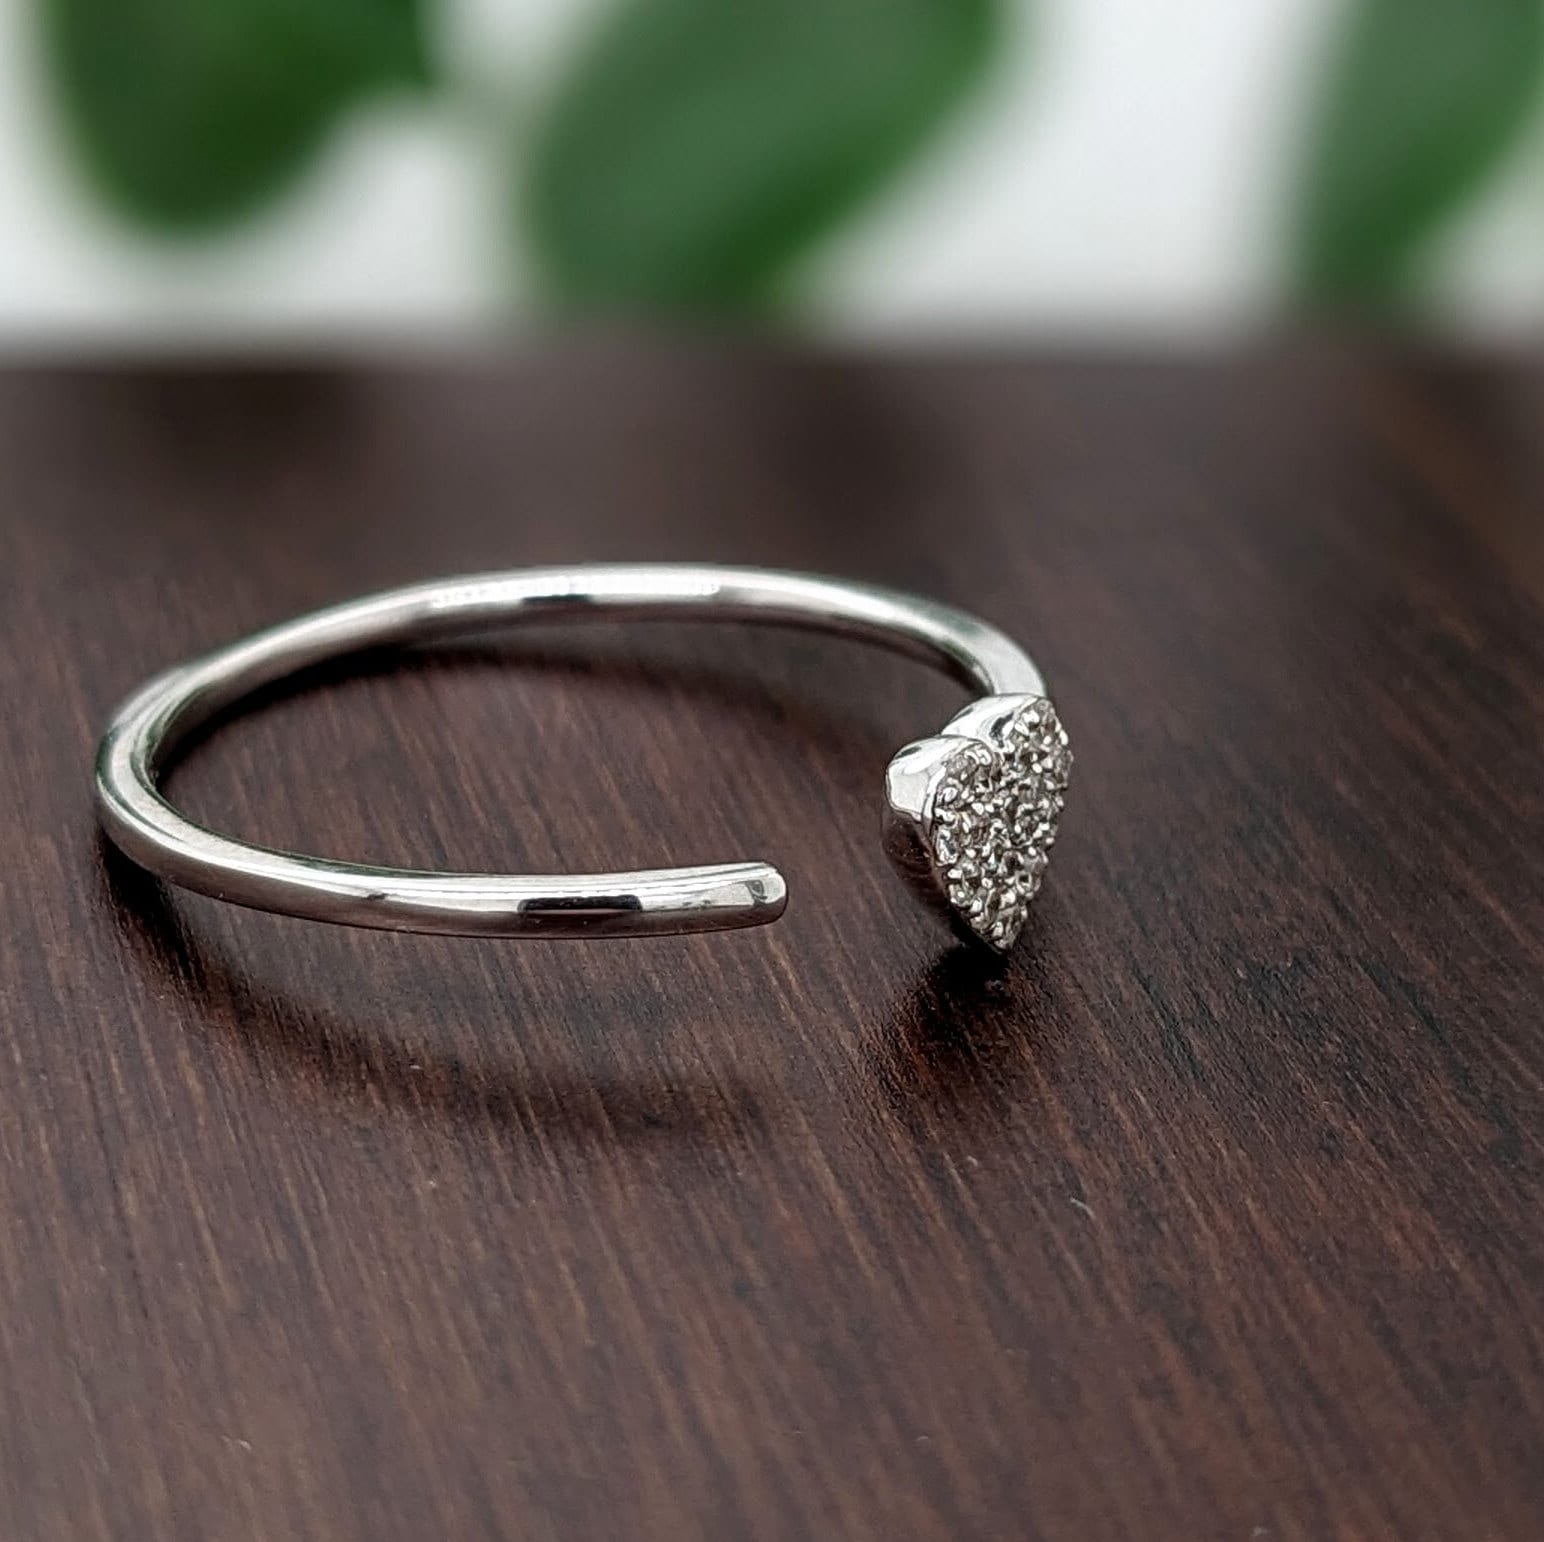 Stackable Rings-Cute Open Heart Band w Natural Diamond Accents in Solid 14k White Gold || Round Diamonds || Natural Diamonds || Stackable || Minimalistic || - NNJGemstones